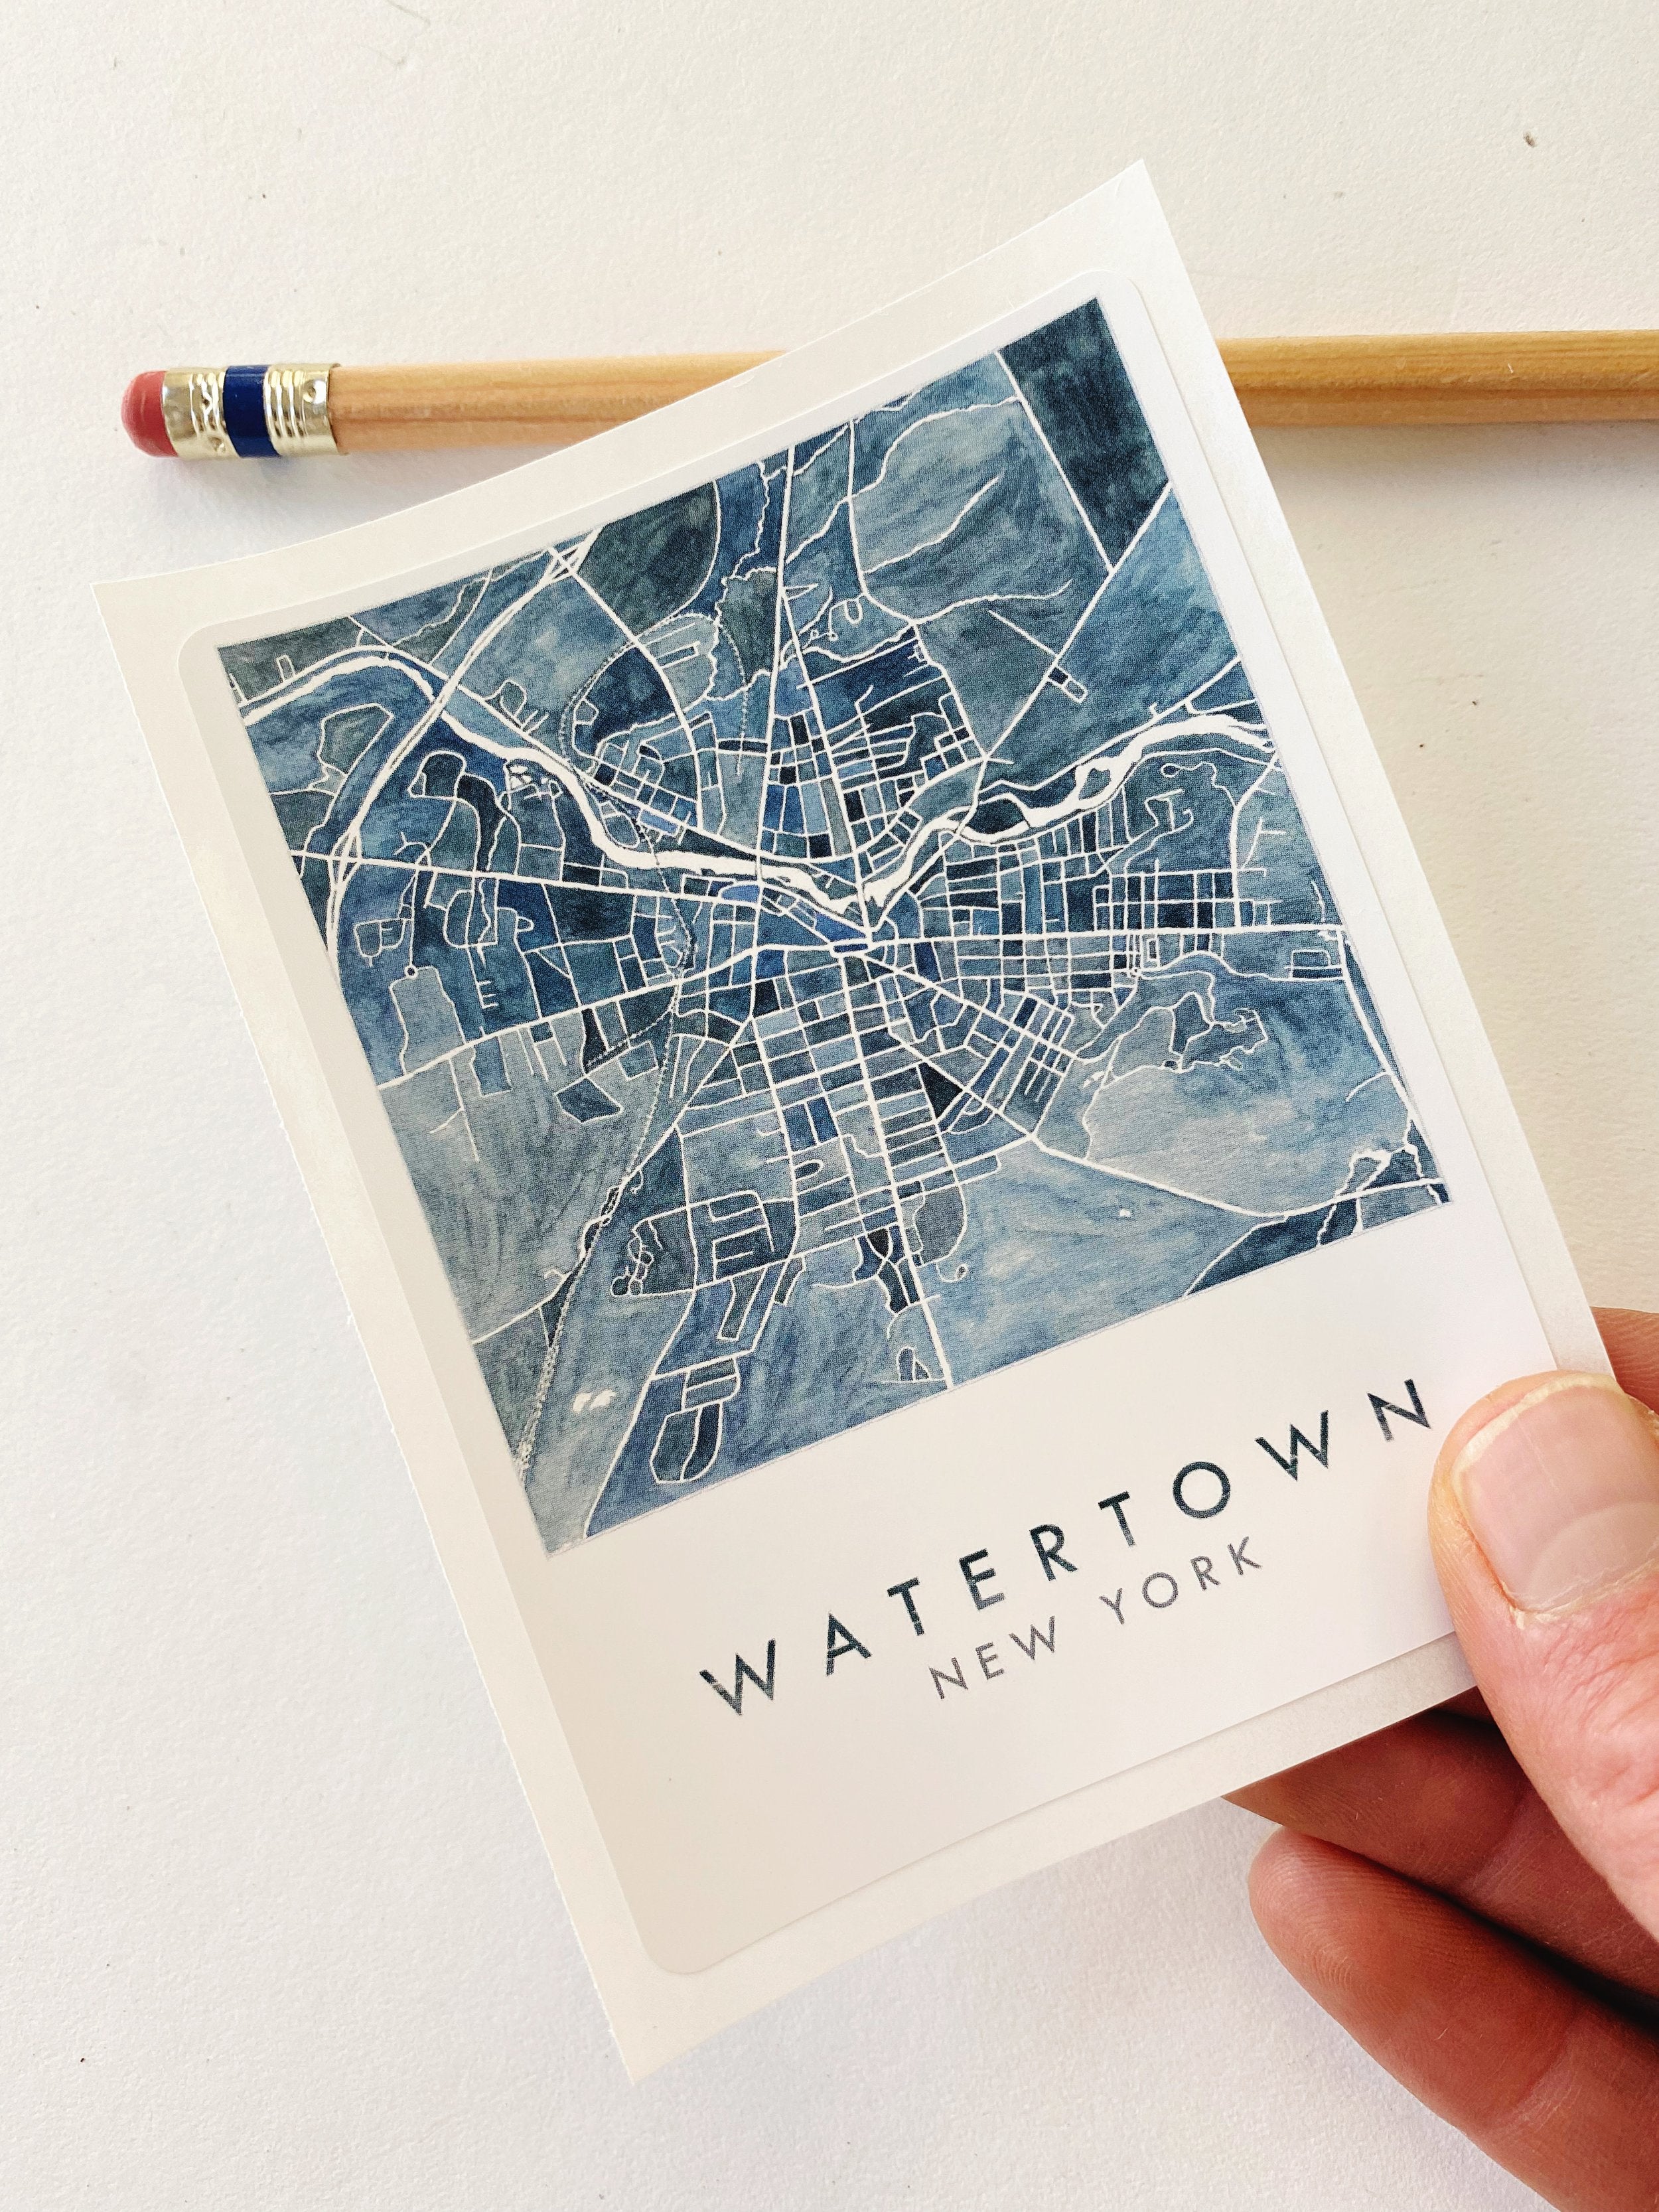 WATERTOWN NY Map Sticker